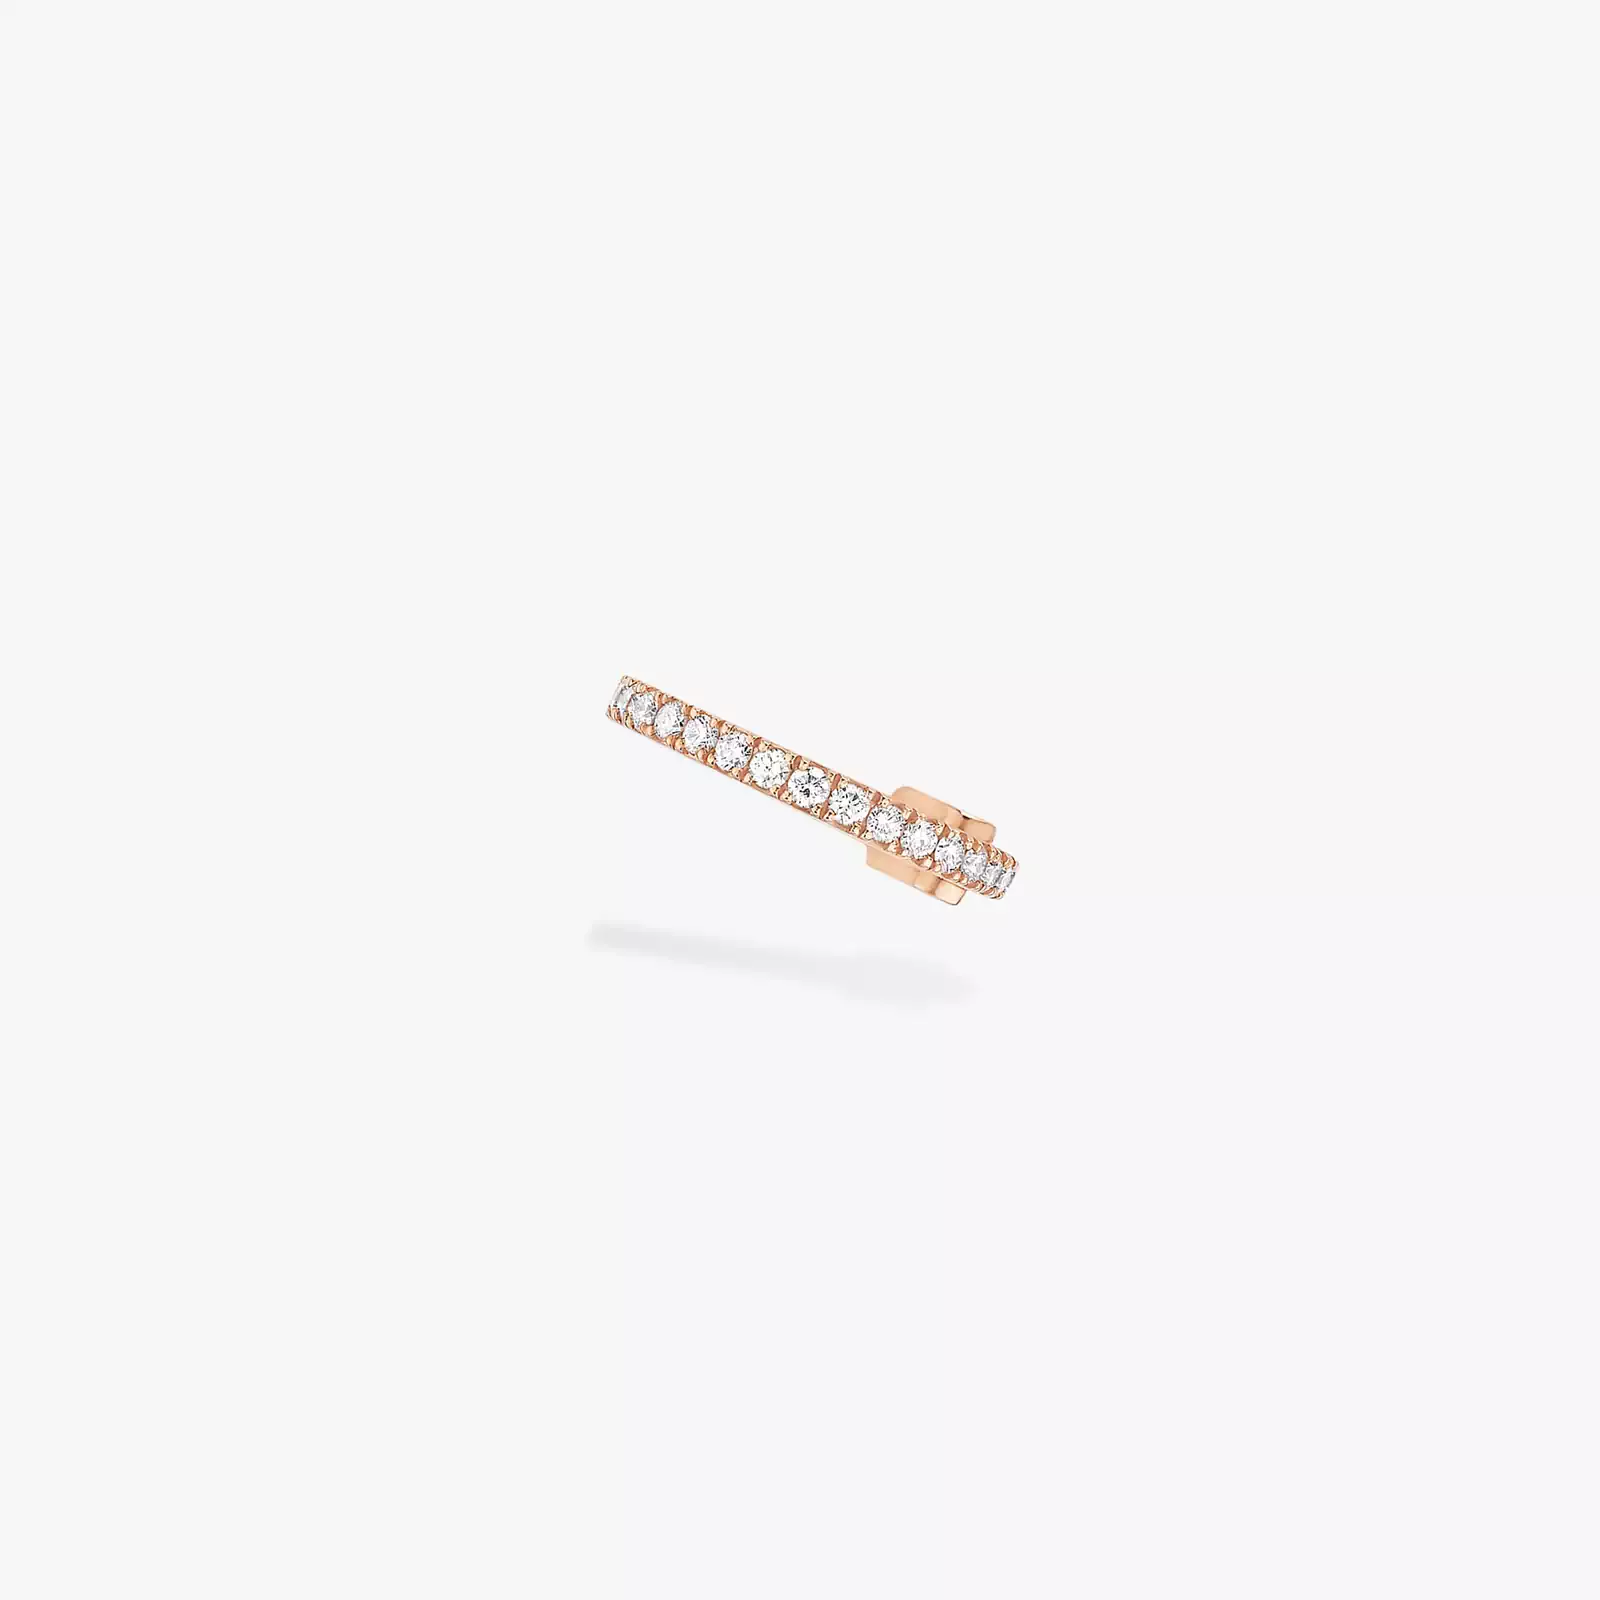 Gatsby Mono Clip Middle  Pink Gold For Her Diamond Earrings 10031-PG